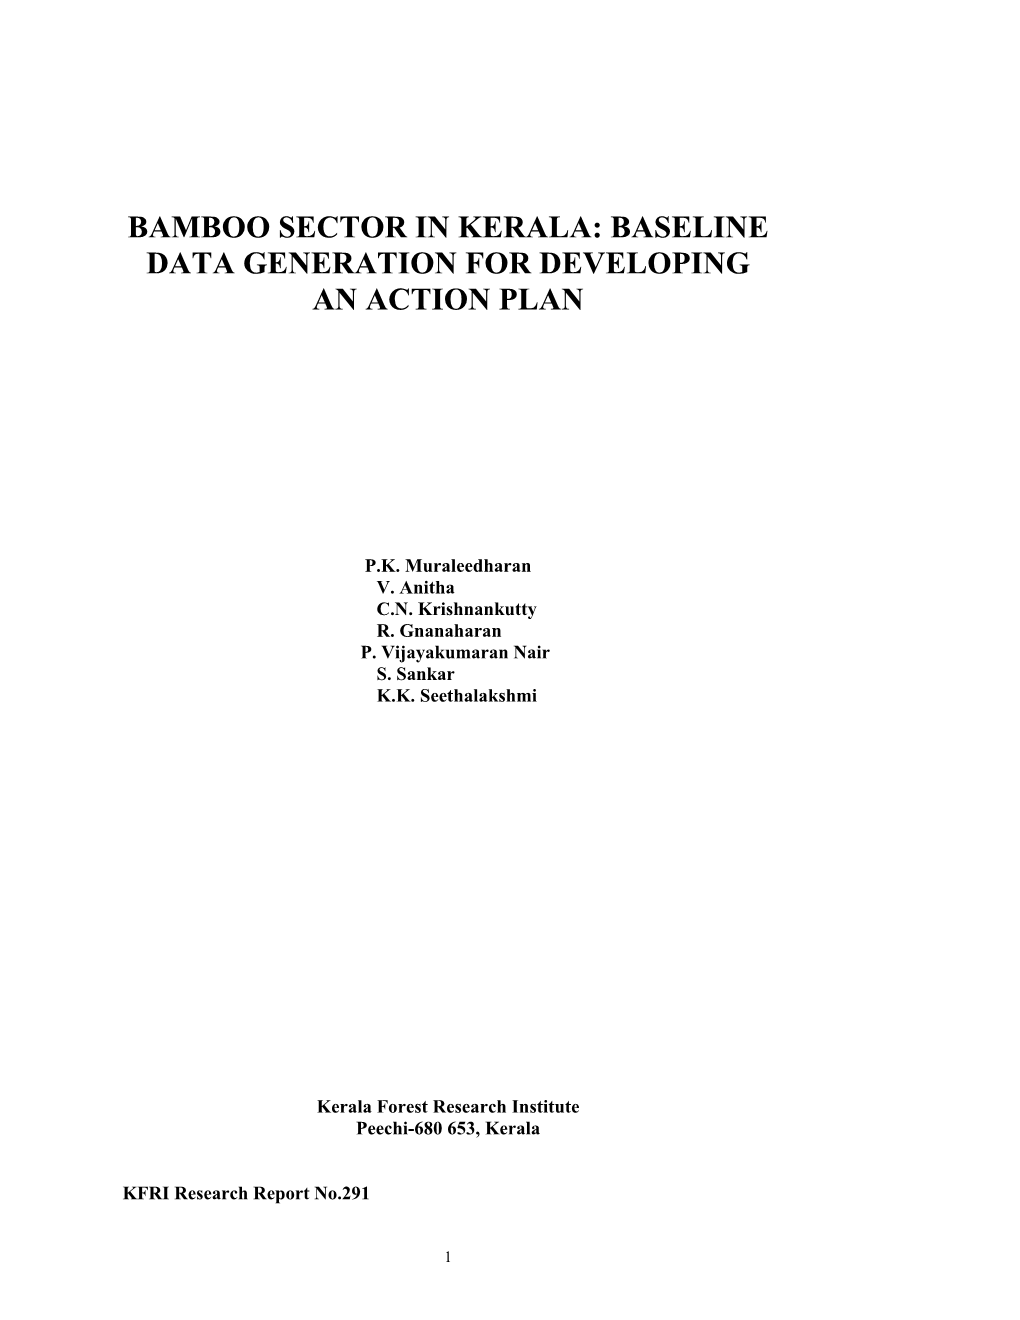 Bamboo Sector in Kerala: Baseline Data Generation for Developing an Action Plan